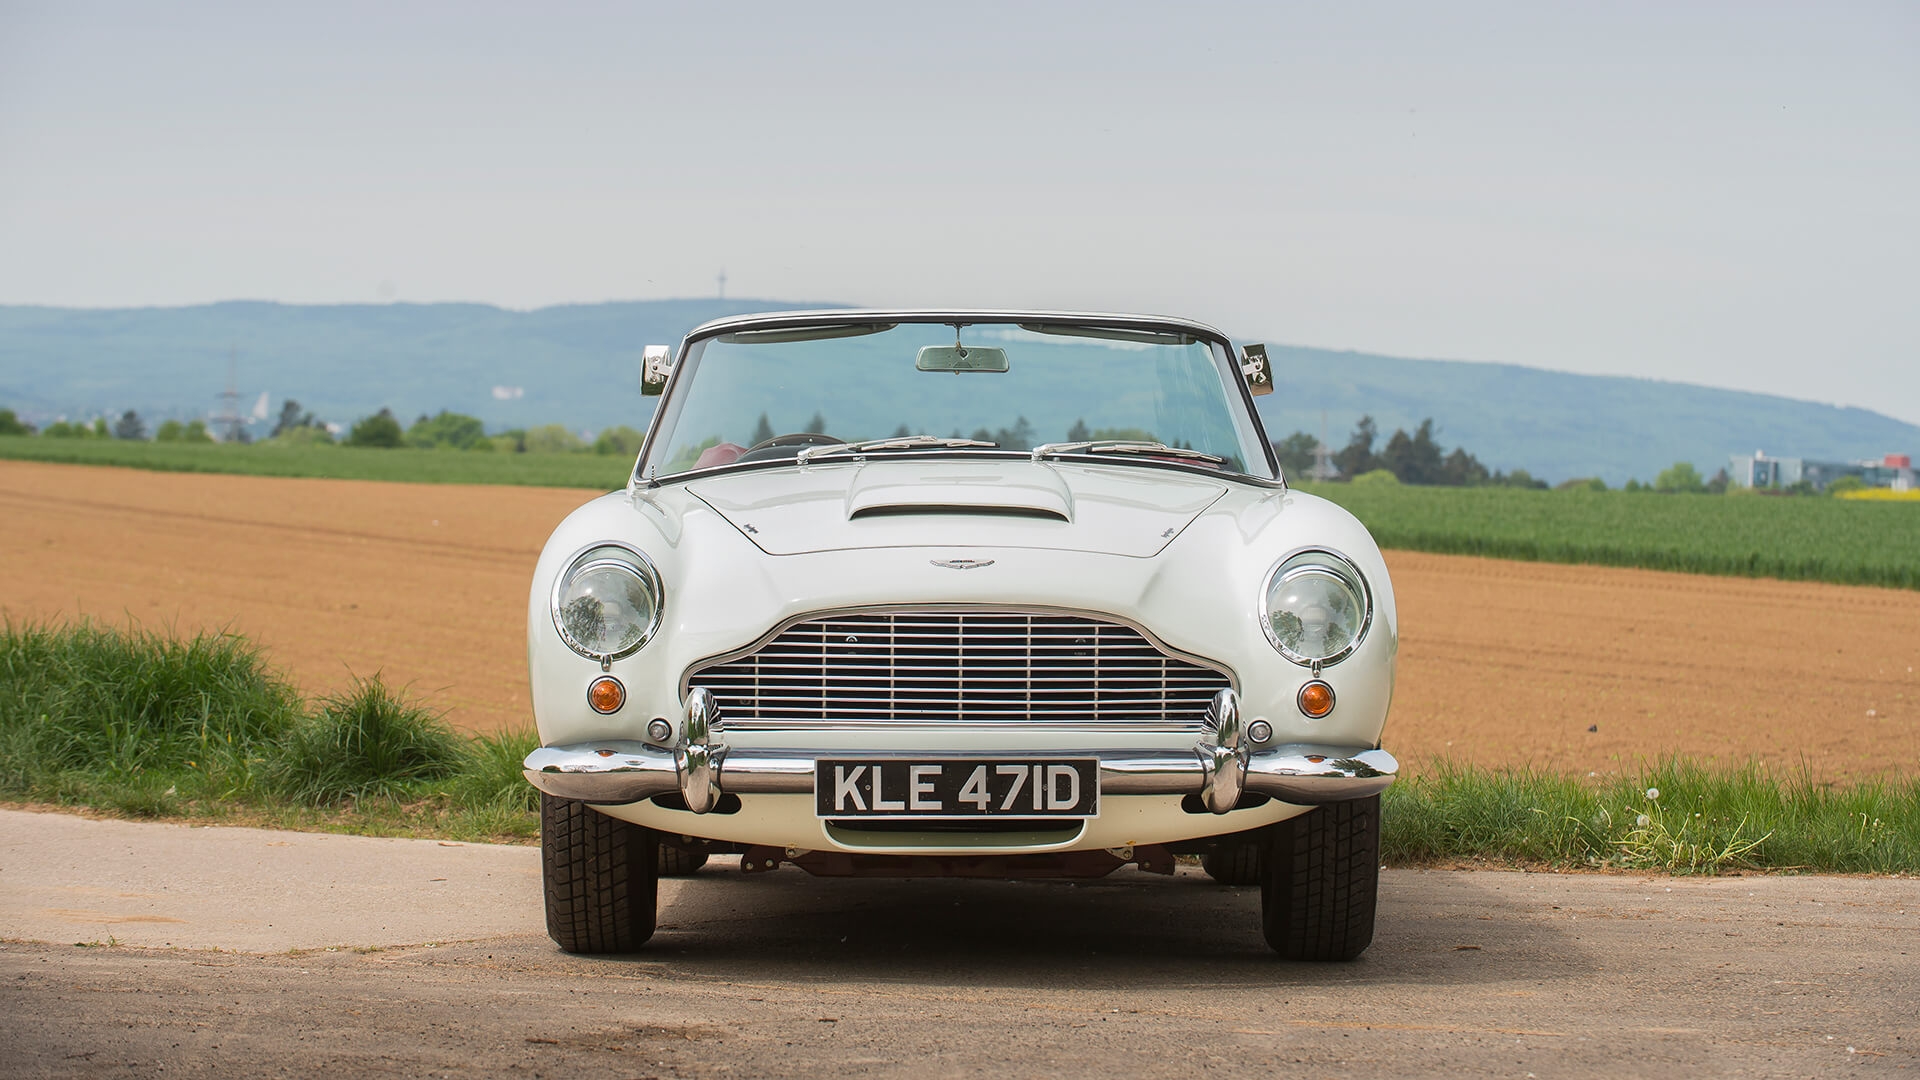 All change at this year’s all-Aston sale: K500 insider’s preview